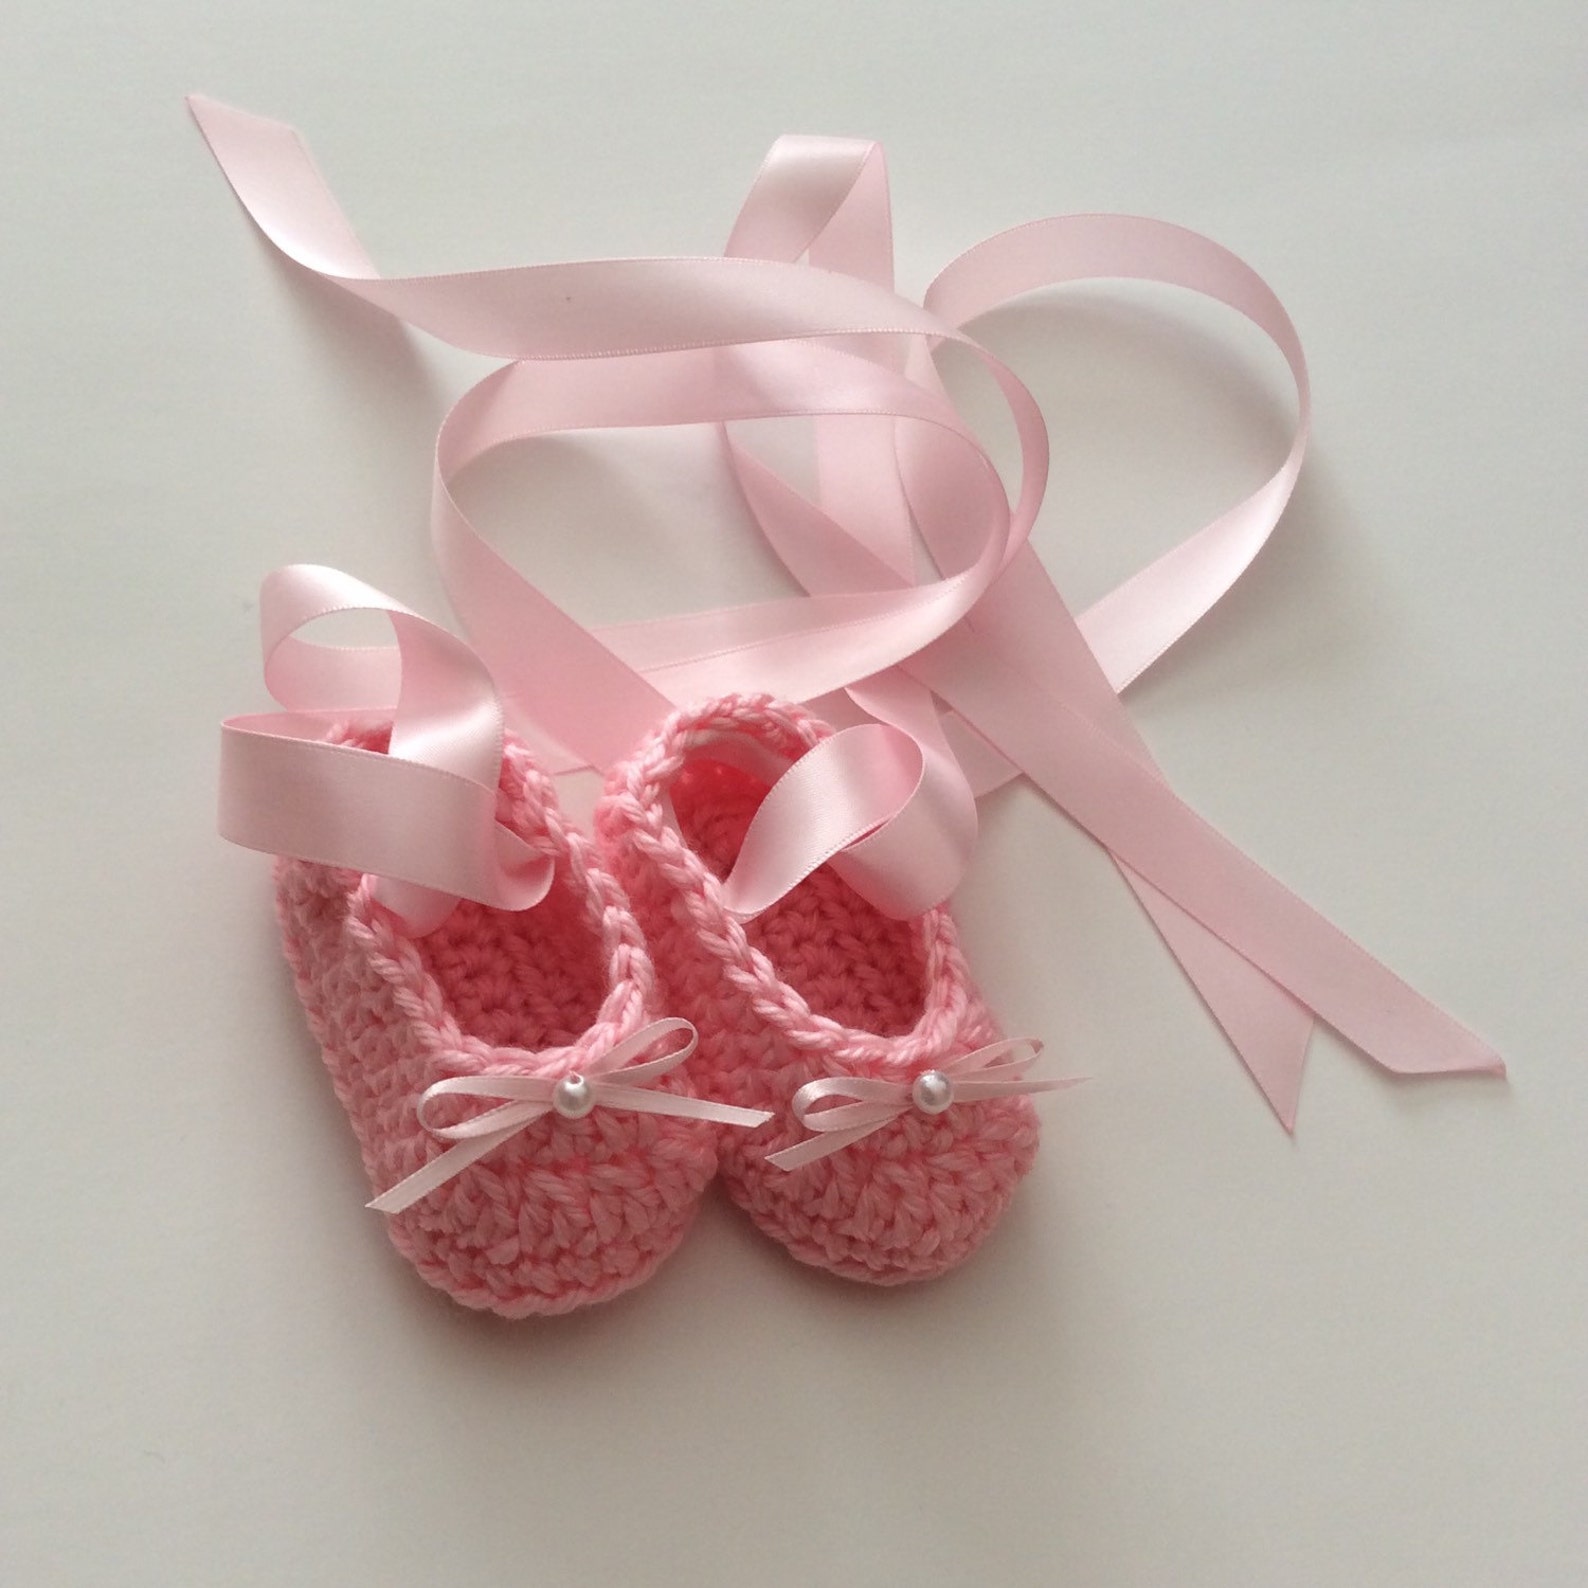 pointe shoe baby booties and crown set, crochet ballet slippers and crown for newborn